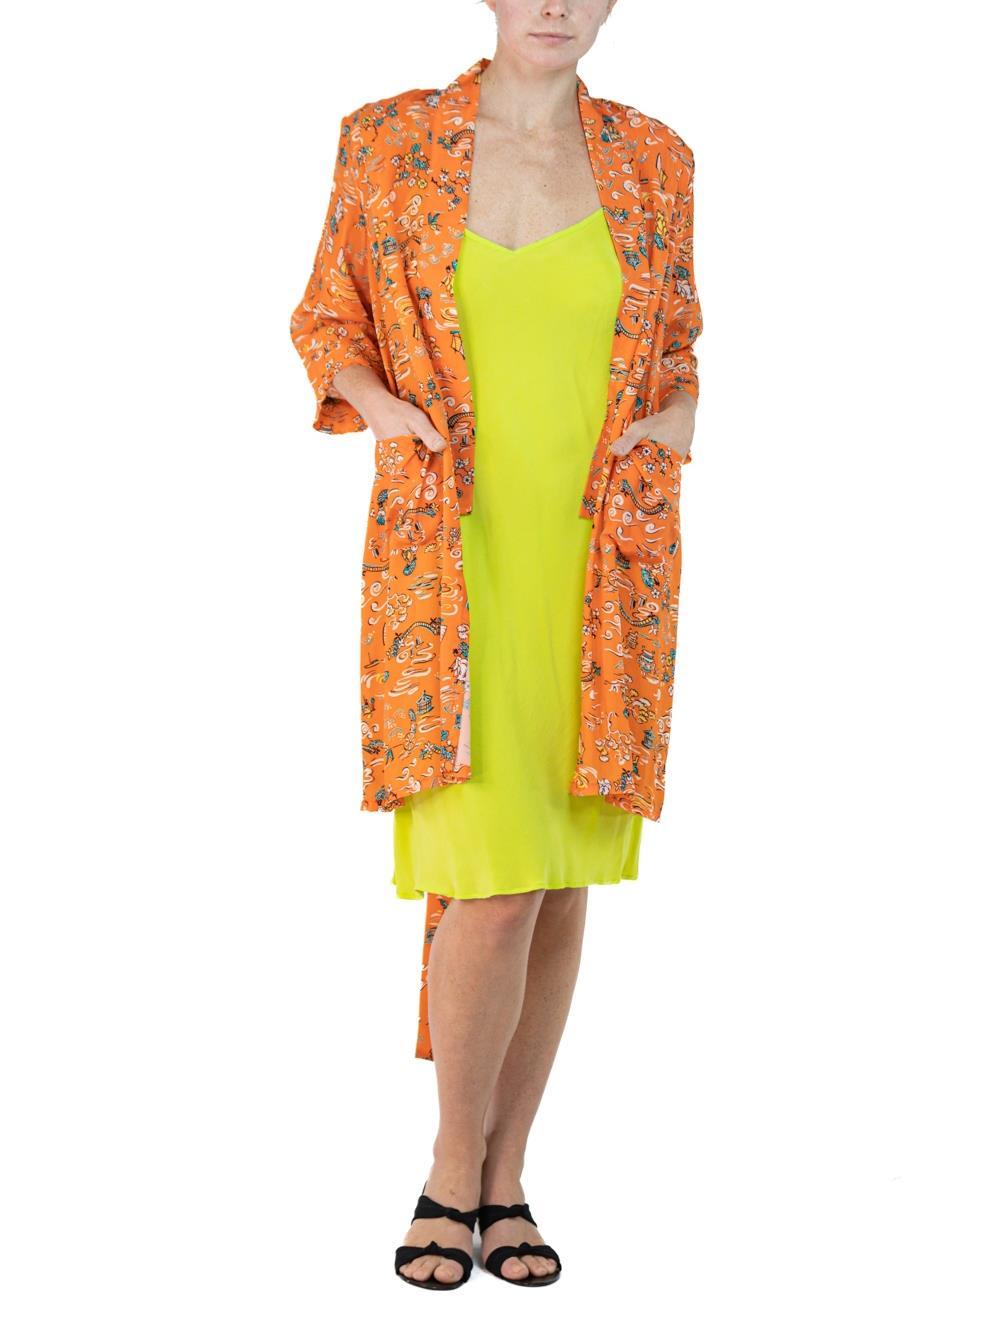 Morphew Collection Orange & Yellow Cherry Blossom Novelty Print Cold Rayon Bias For Sale 4